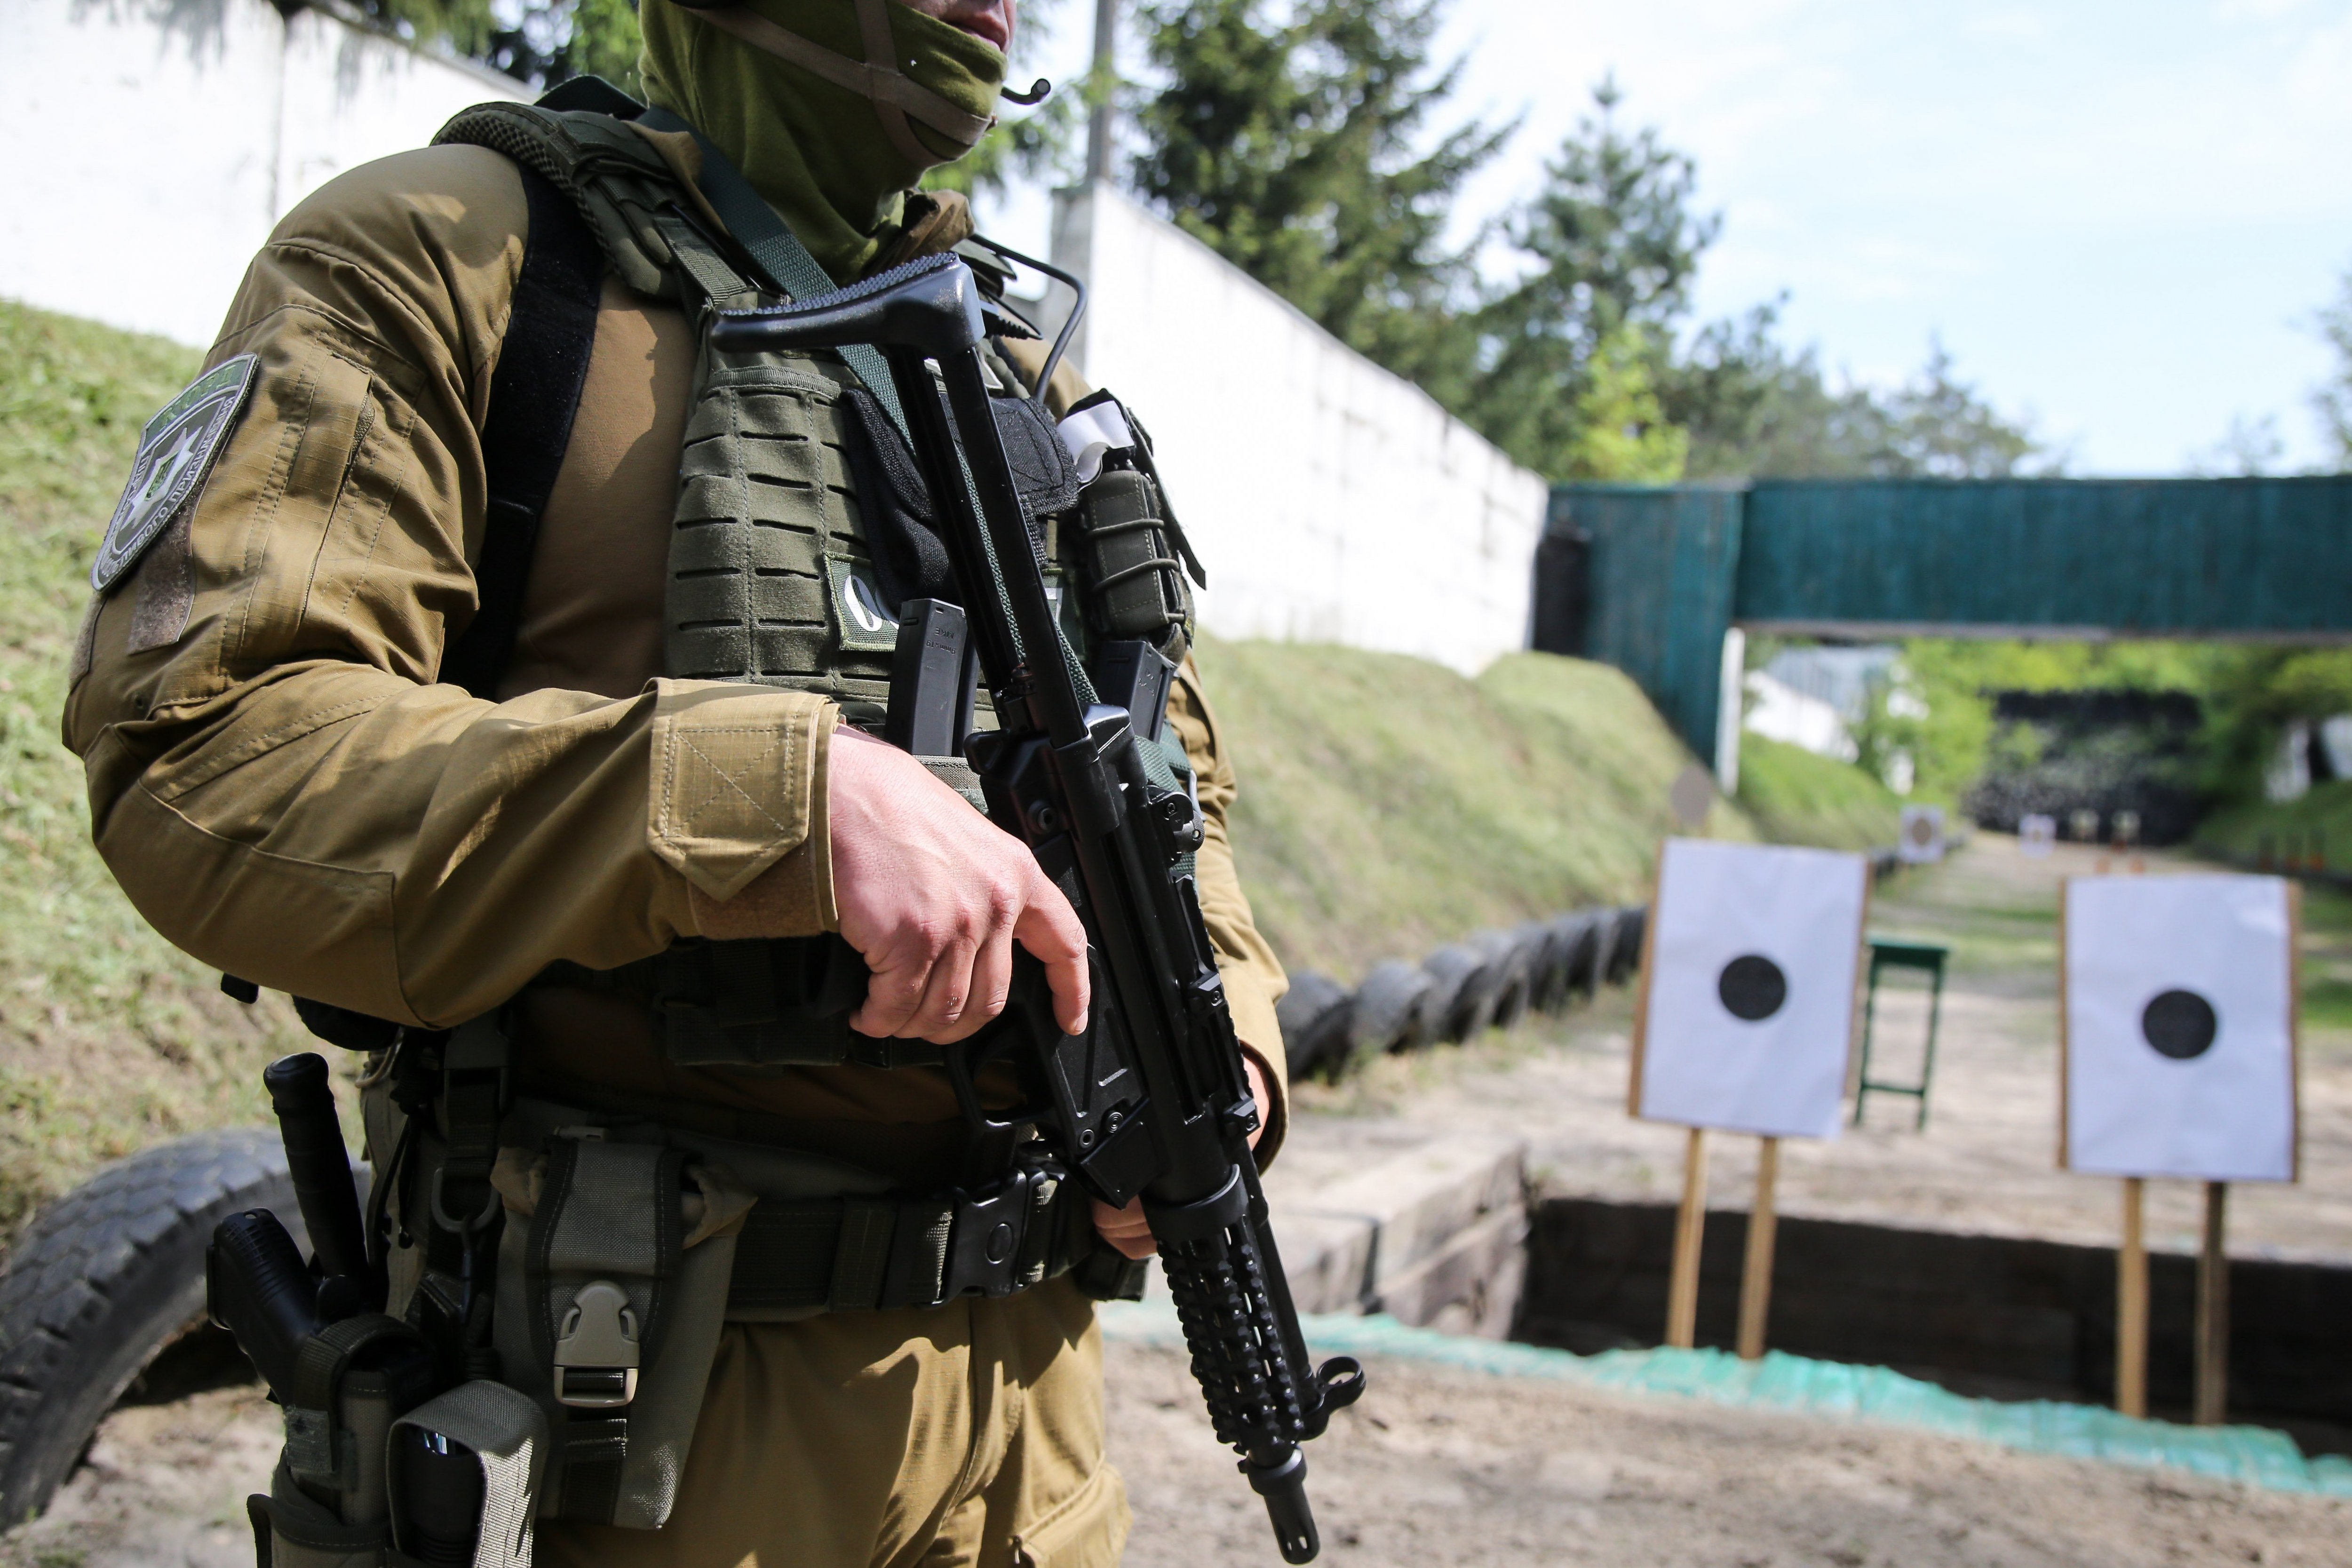 Ukraine&#8217;s KORD special police unit personnel presents their new Heckler &#038; Koch MP5 submachine guns at a firing range near Kyiv on May 15, 2019.